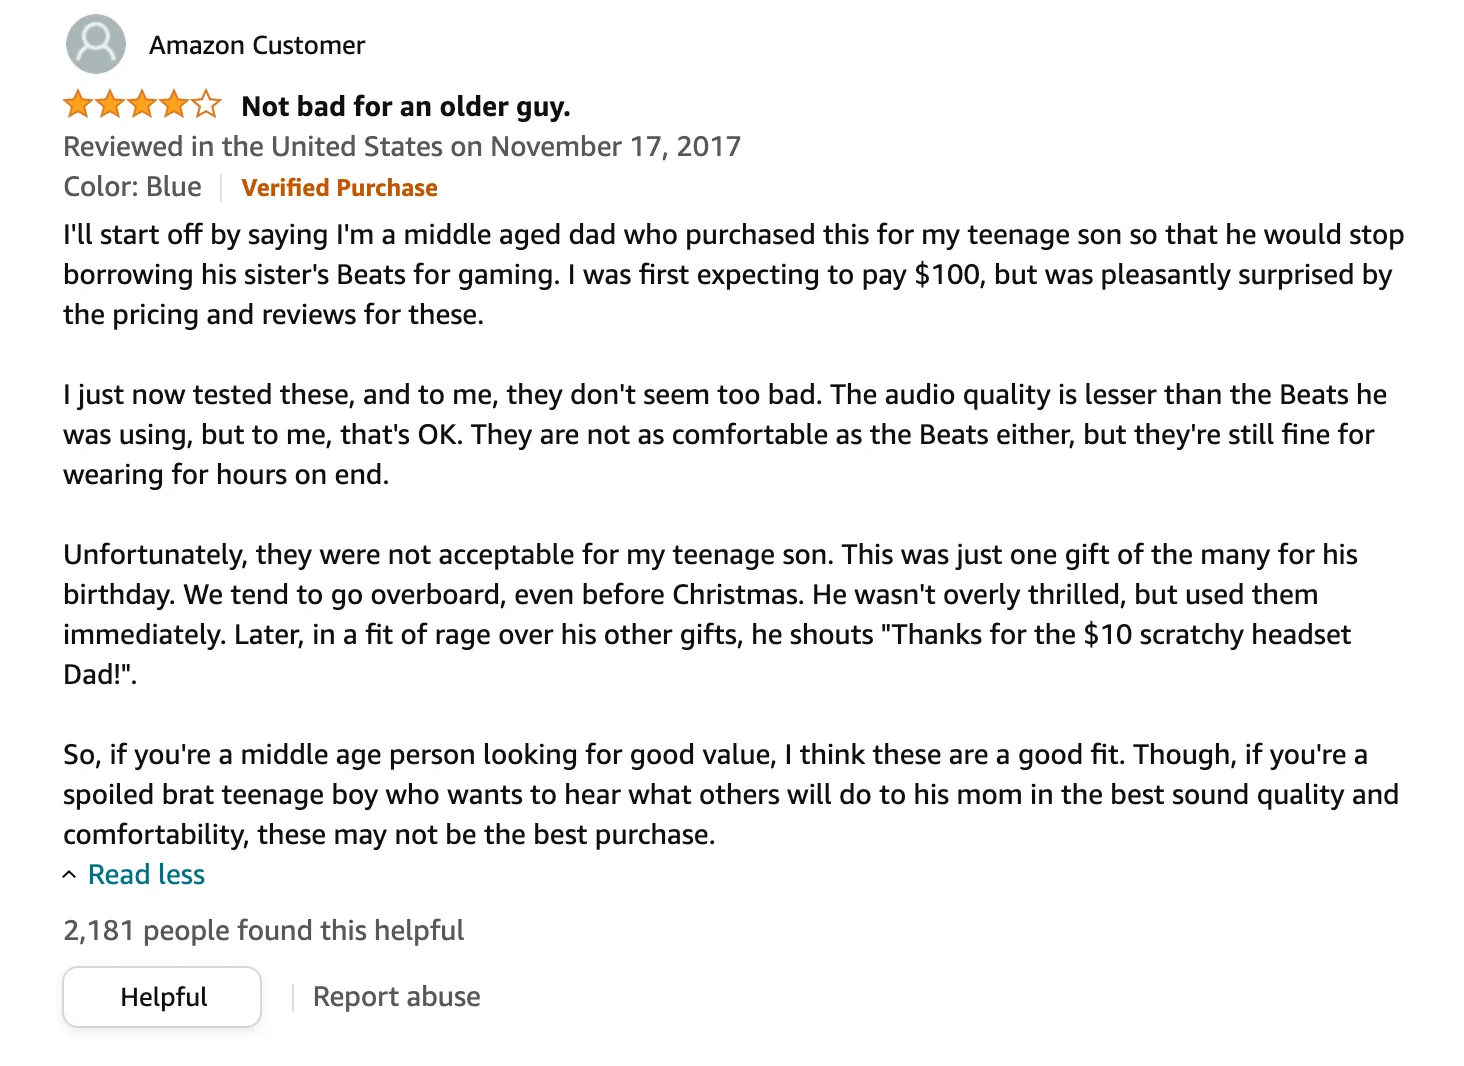 Amazon Customer review which reflects the Experience part pf E-E-A-T